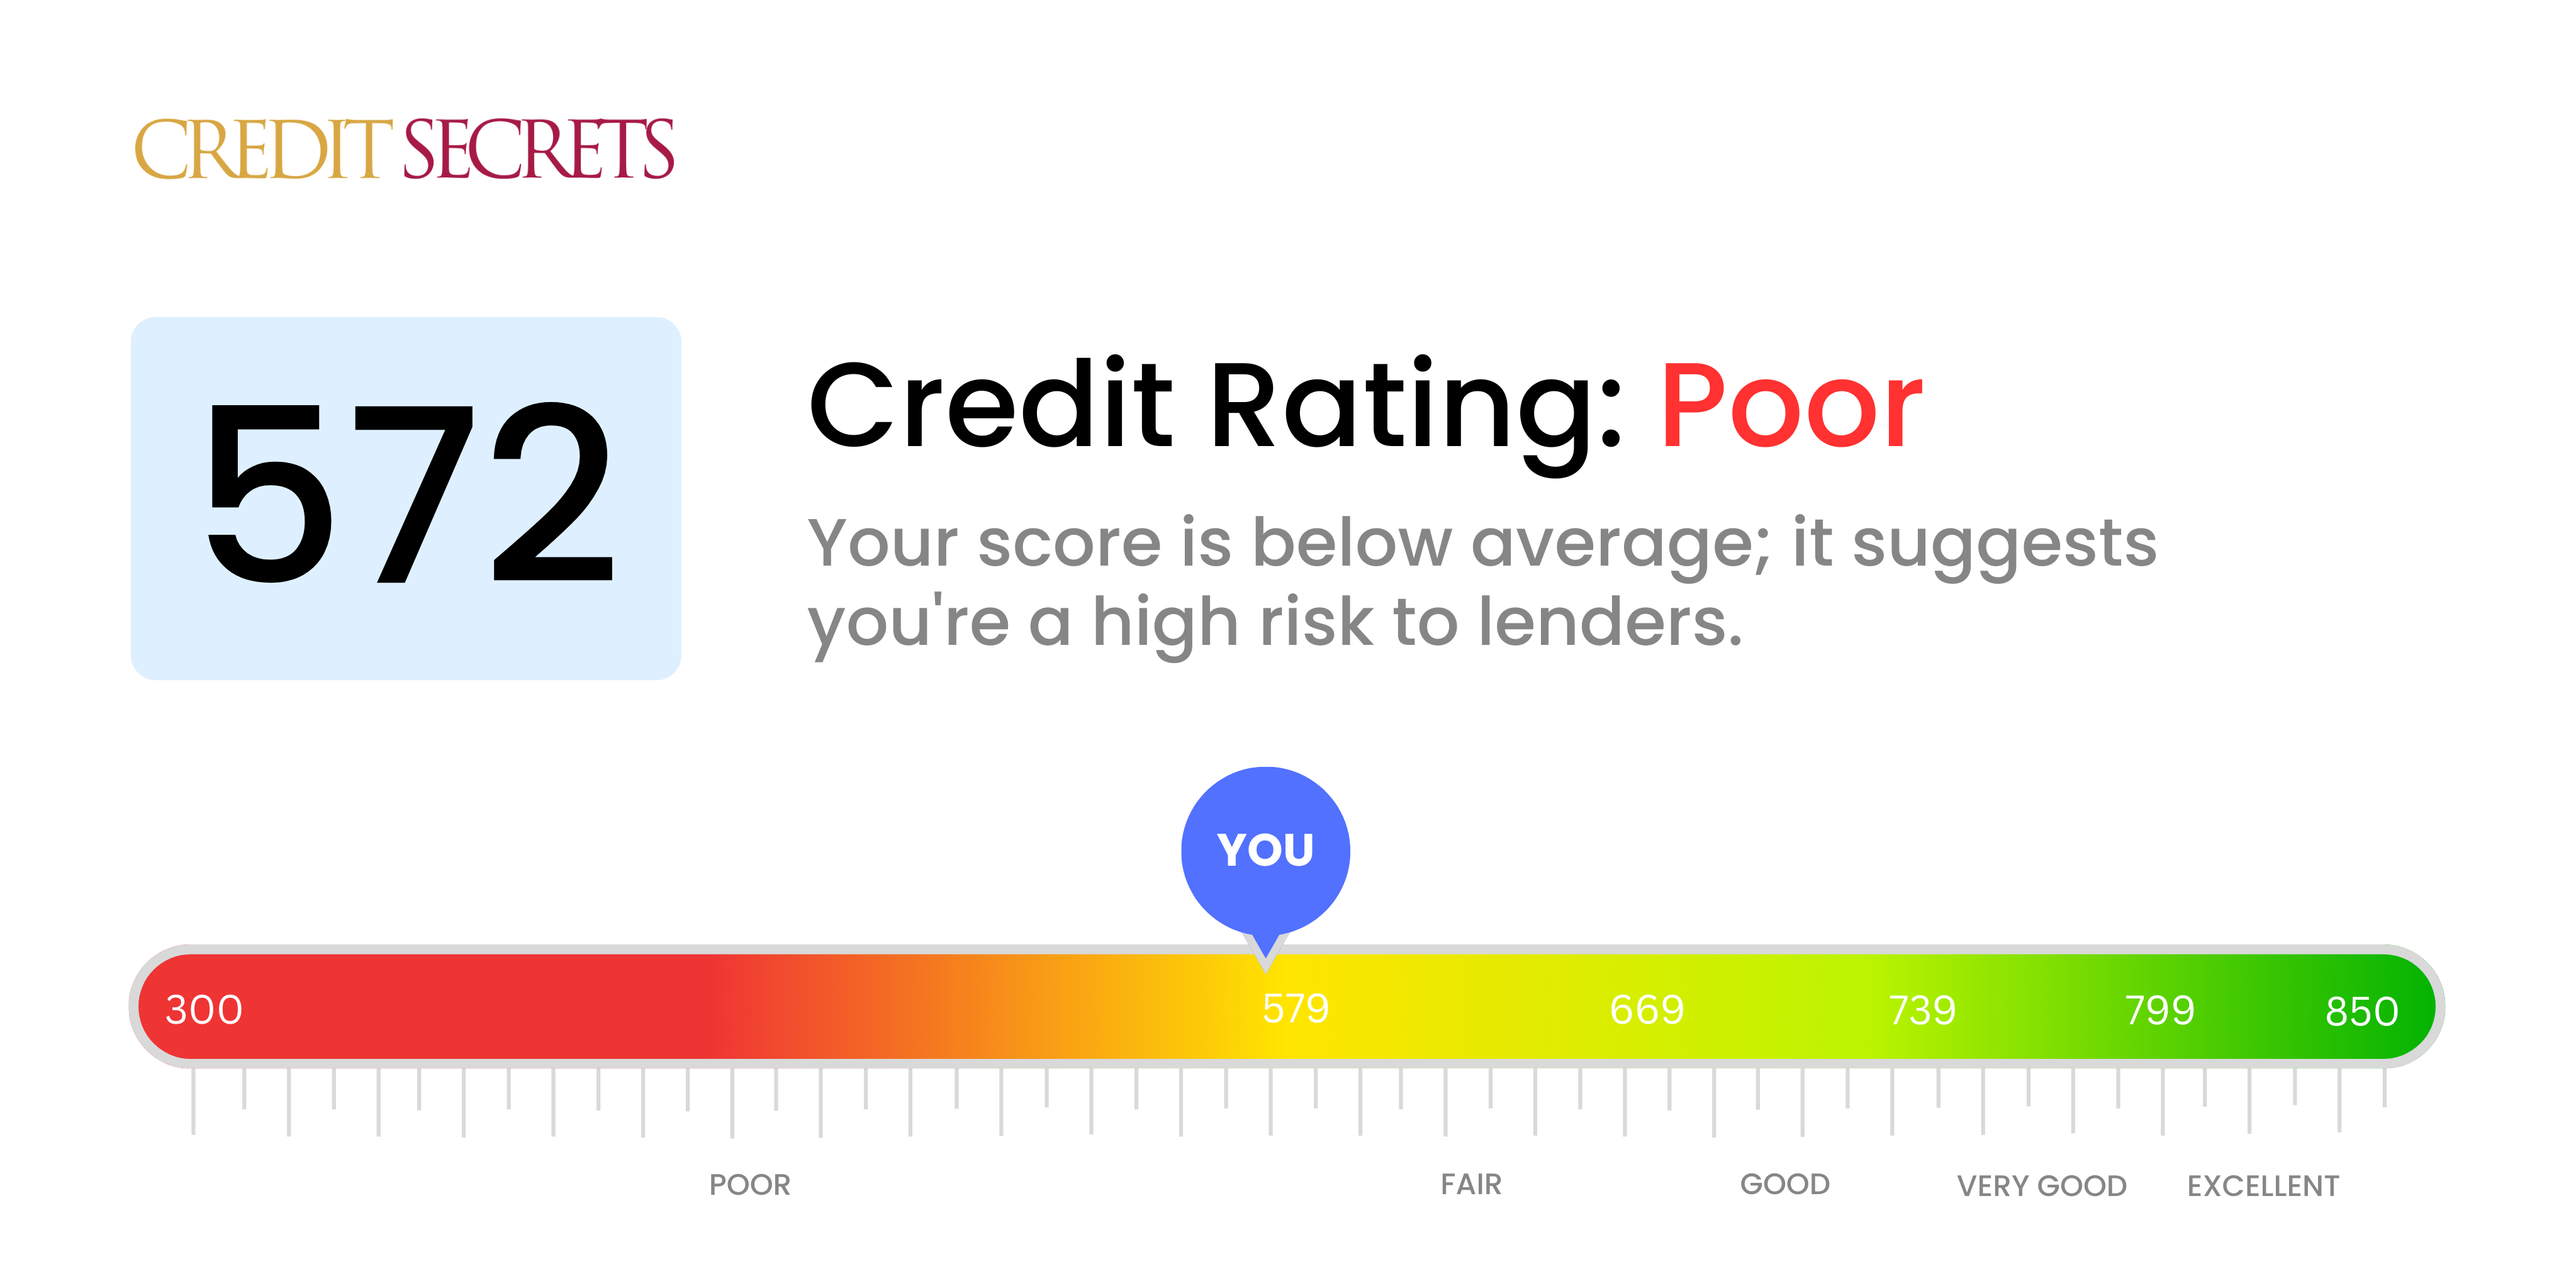 Is 572 a good credit score?